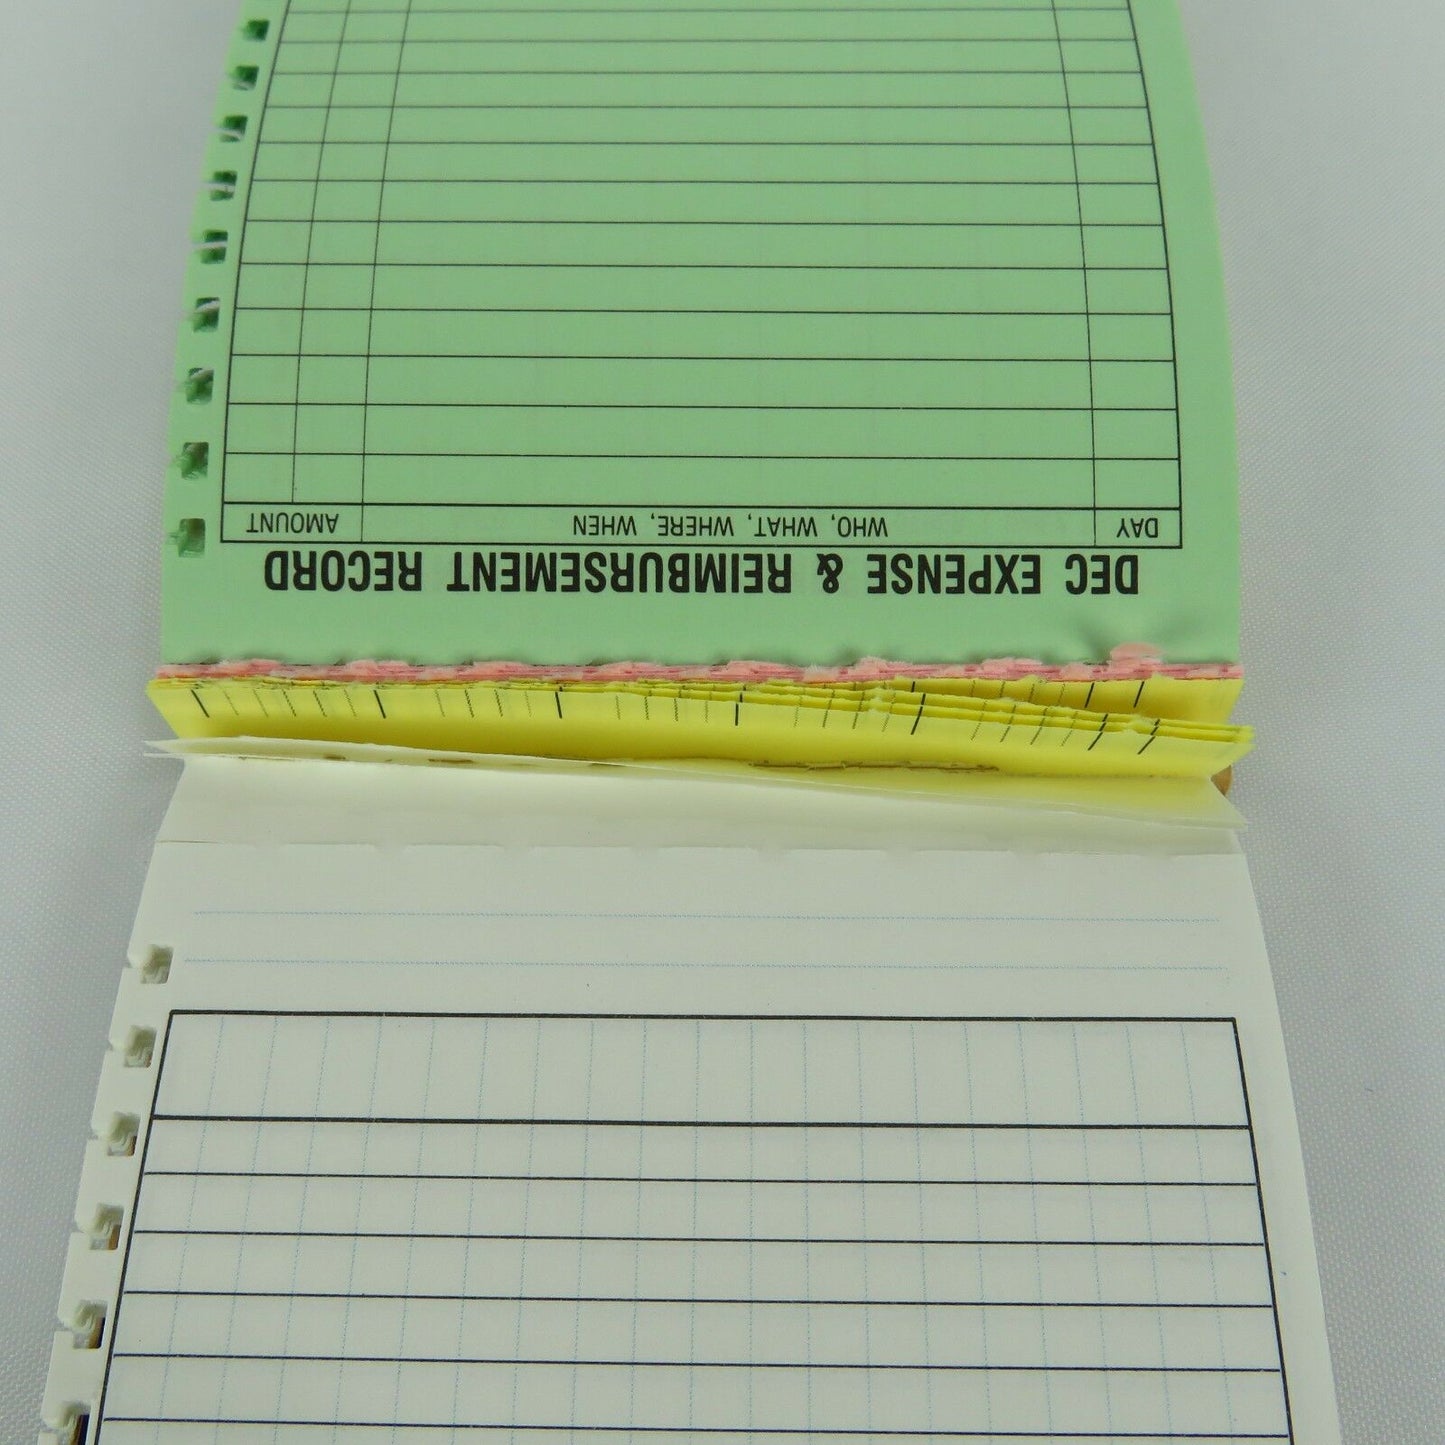 Vintage Pocket Day Timer Refill Pad Assortment Pack Sheets Style C Memo 48821 - At Grandma's Table